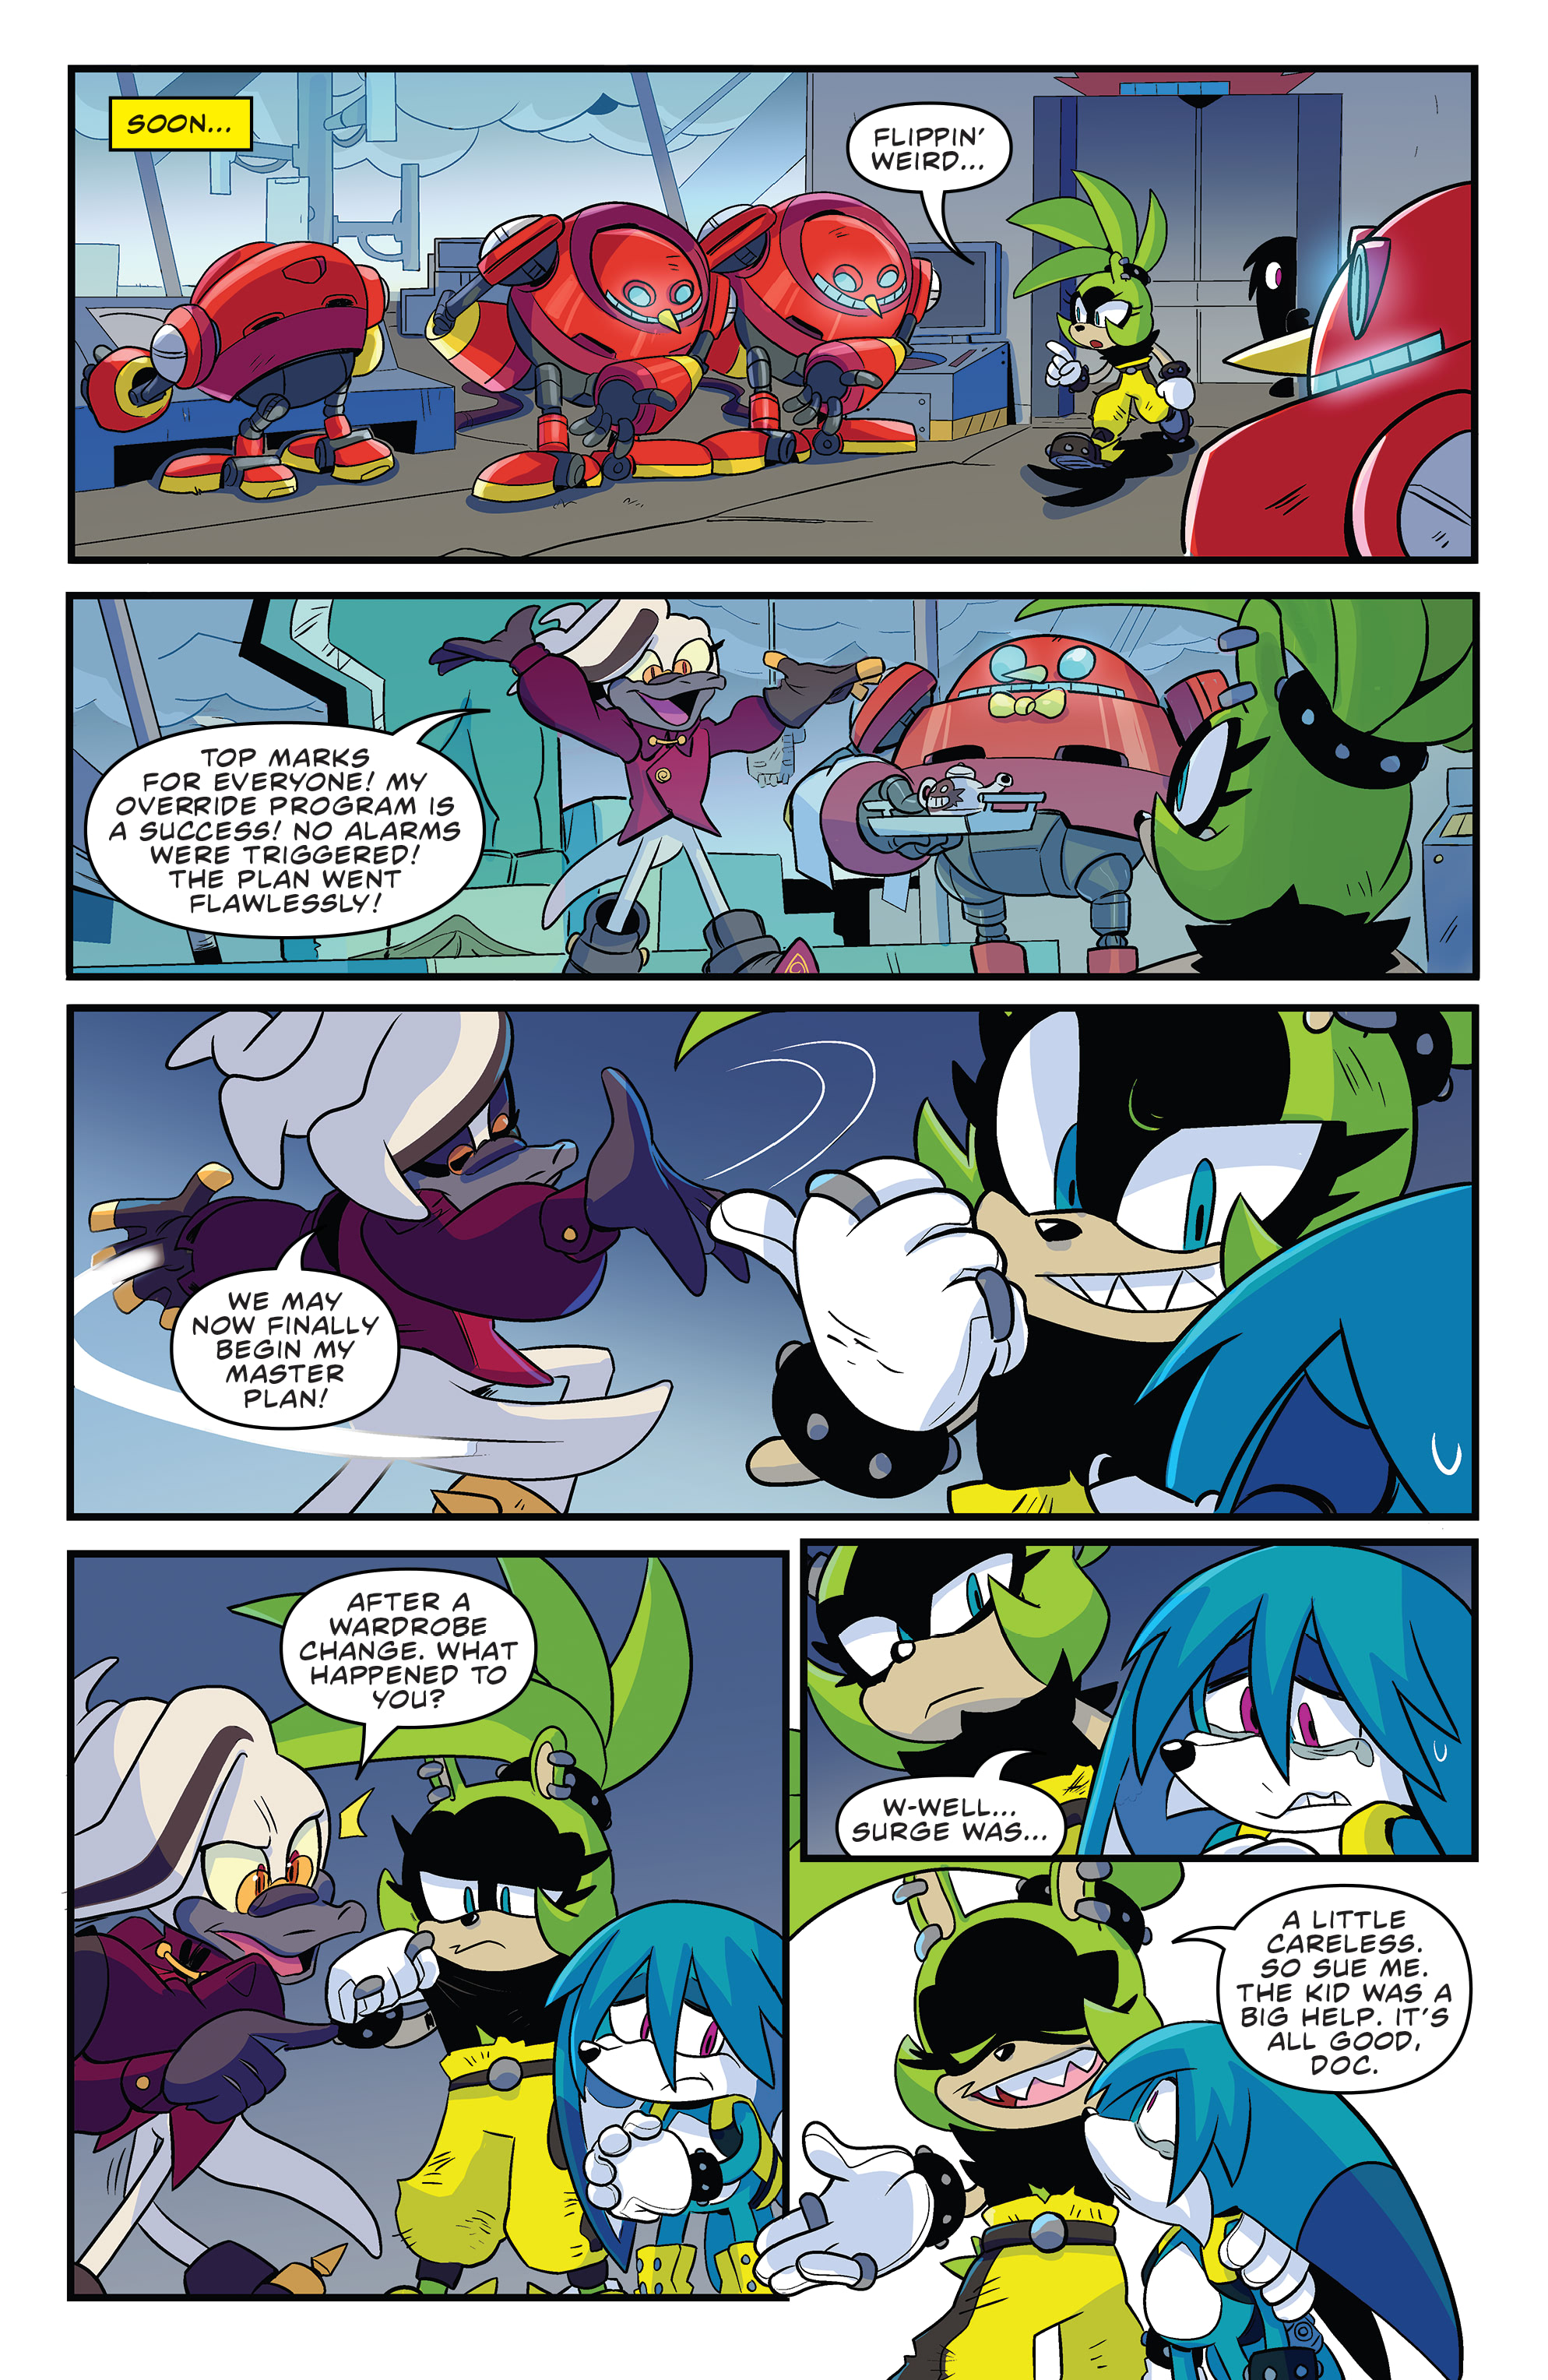 Sonic The Hedgehog Imposter Syndrome 2021 Chapter 2 Page 5 